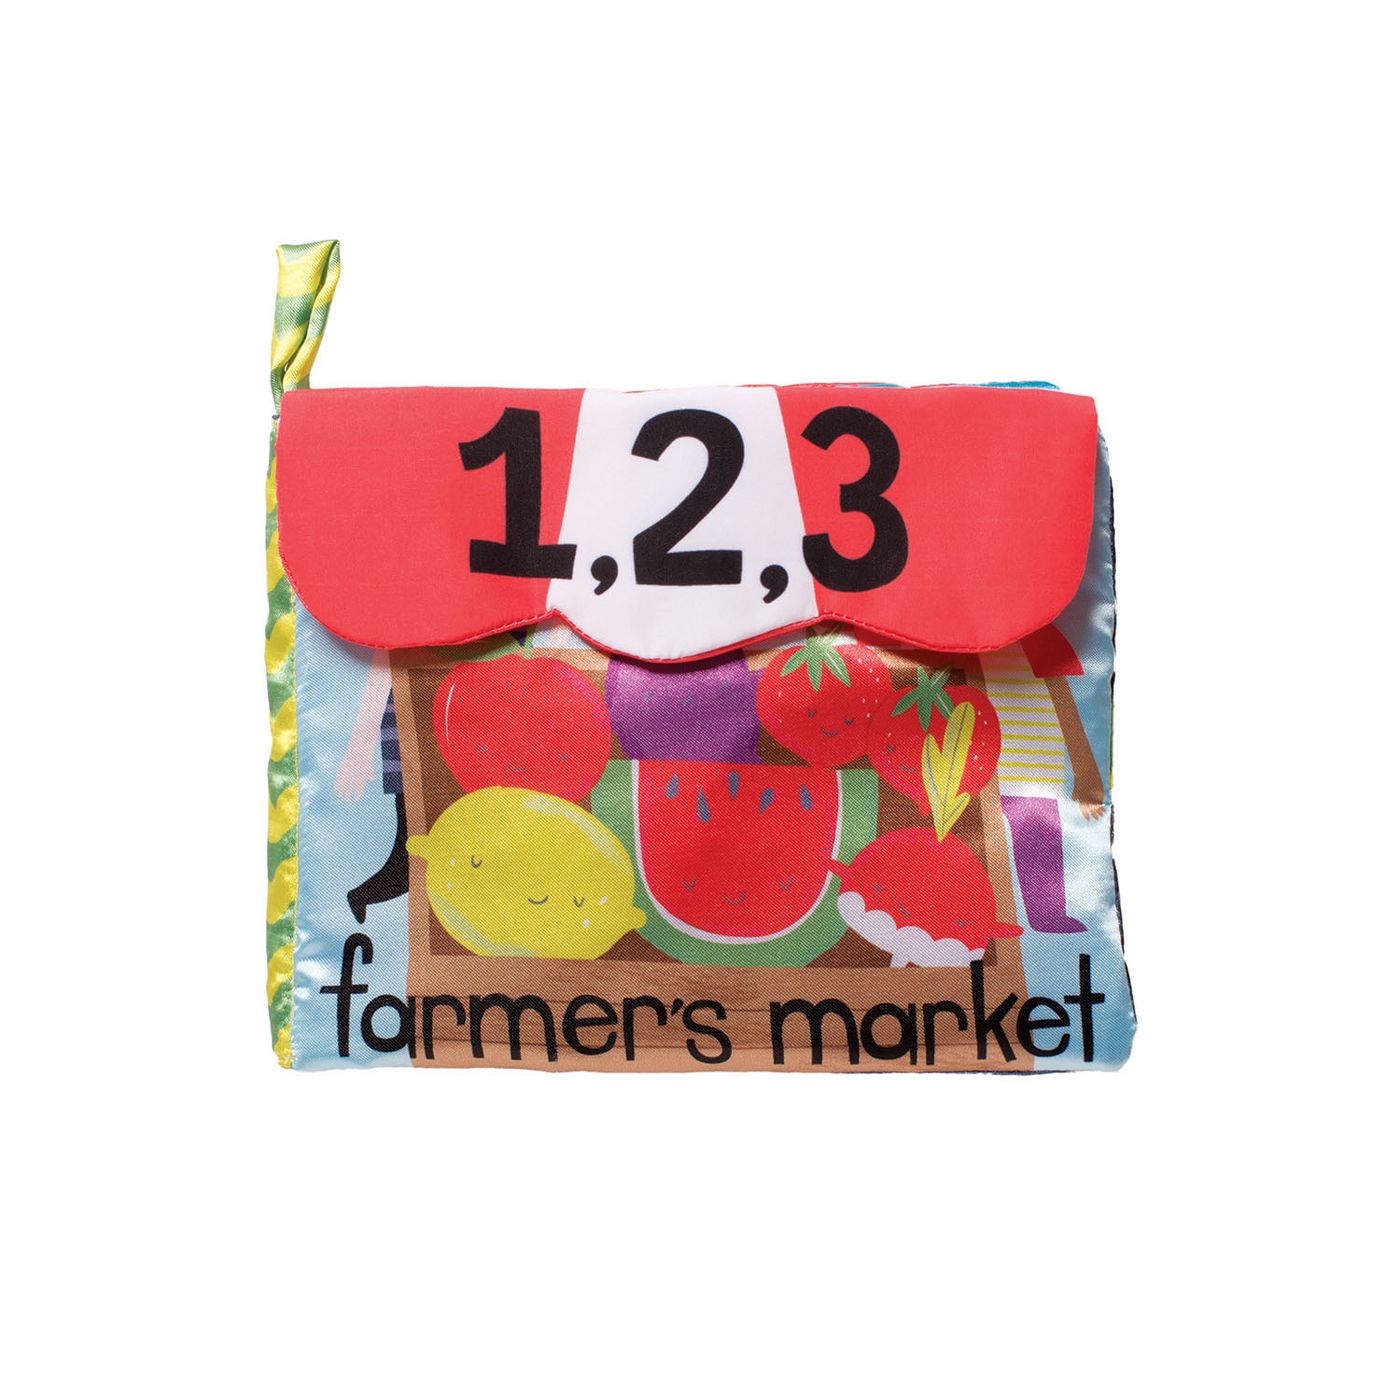 Manhattan Toy Farmers Market Book - image 1 of 6